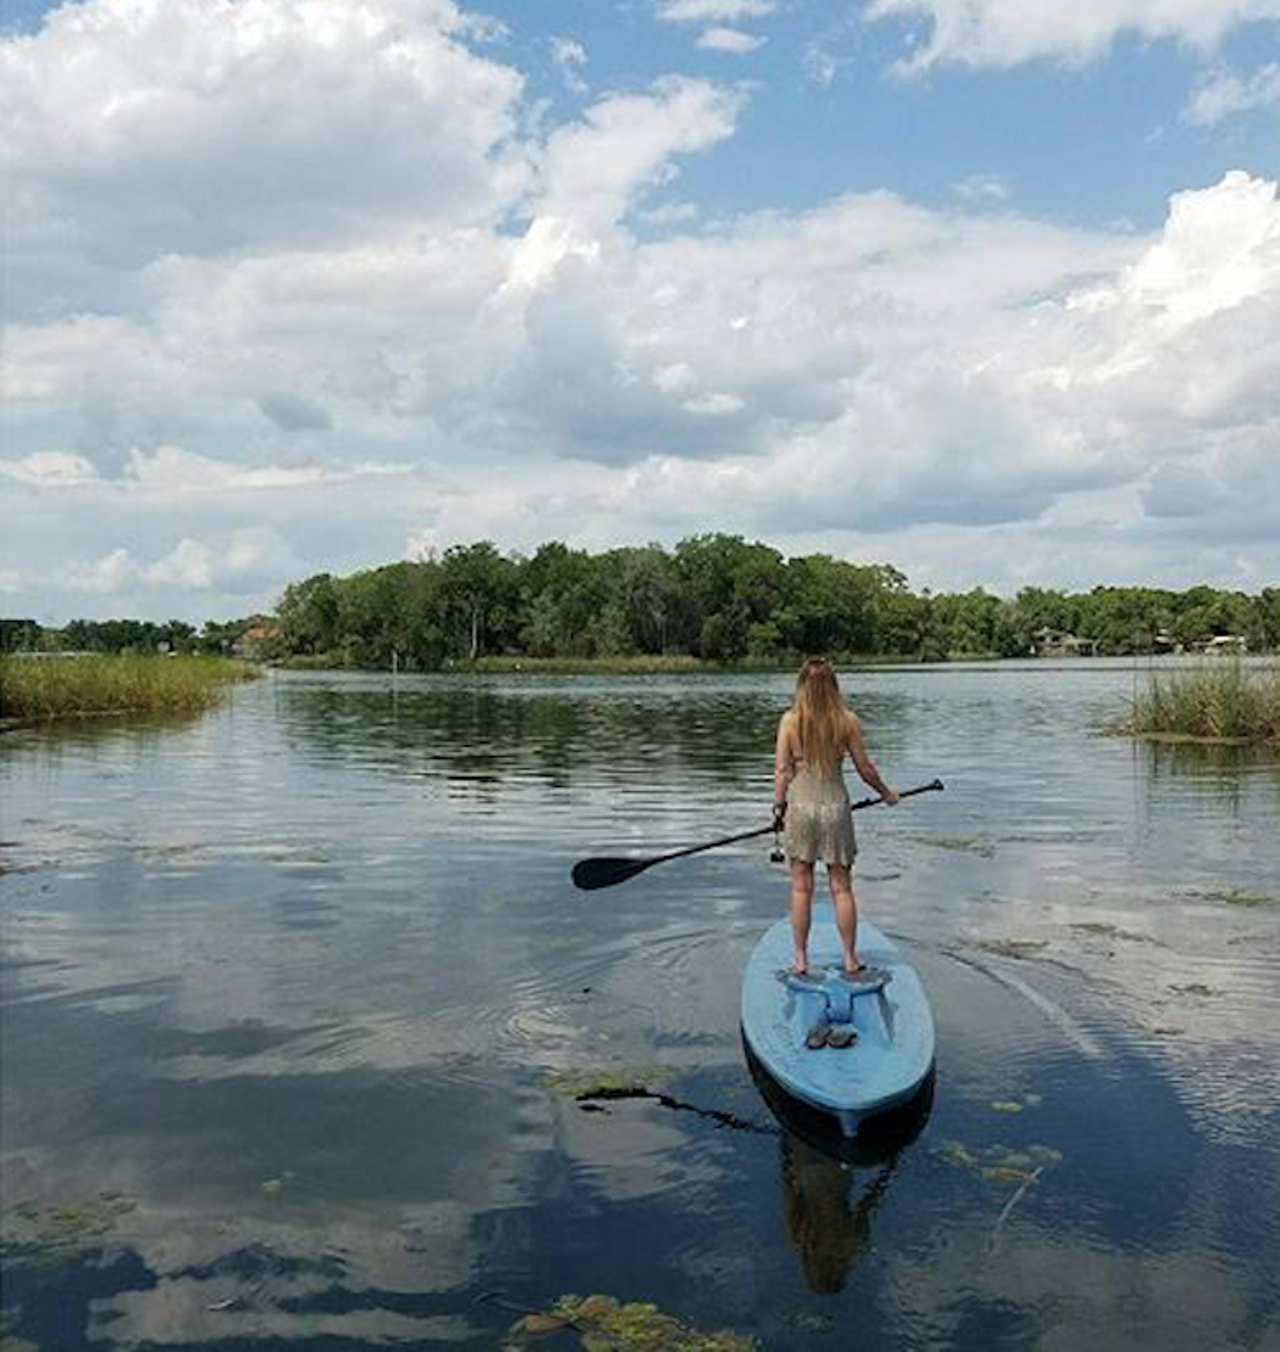 Crystal River
544 N. Citrus Ave., Crystal River
Distance from Orlando: 1 hour, 33 minutes
Whether you want to rent a beginner board or a standard board for anywhere between $25 and $85, Manatee Paddle offers daily rentals and tours for you to enjoy and explore Crystal River. 
Photo via juliesmithxxvii/Instagram